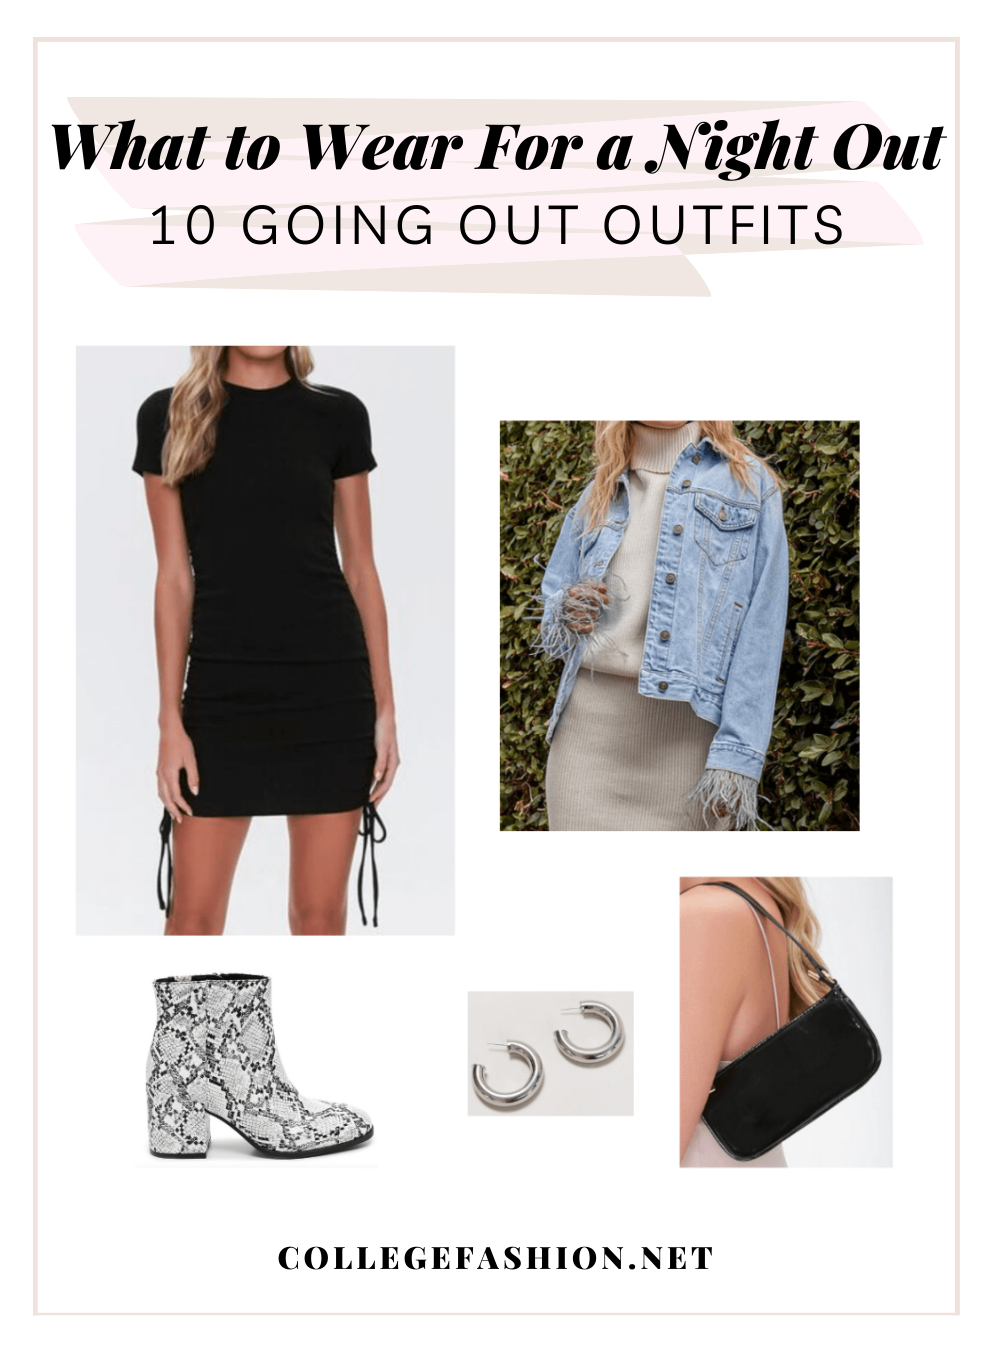 Saturday Night Dinner Outfit Ideas - Https Encrypted Tbn0 Gstatic Com ...